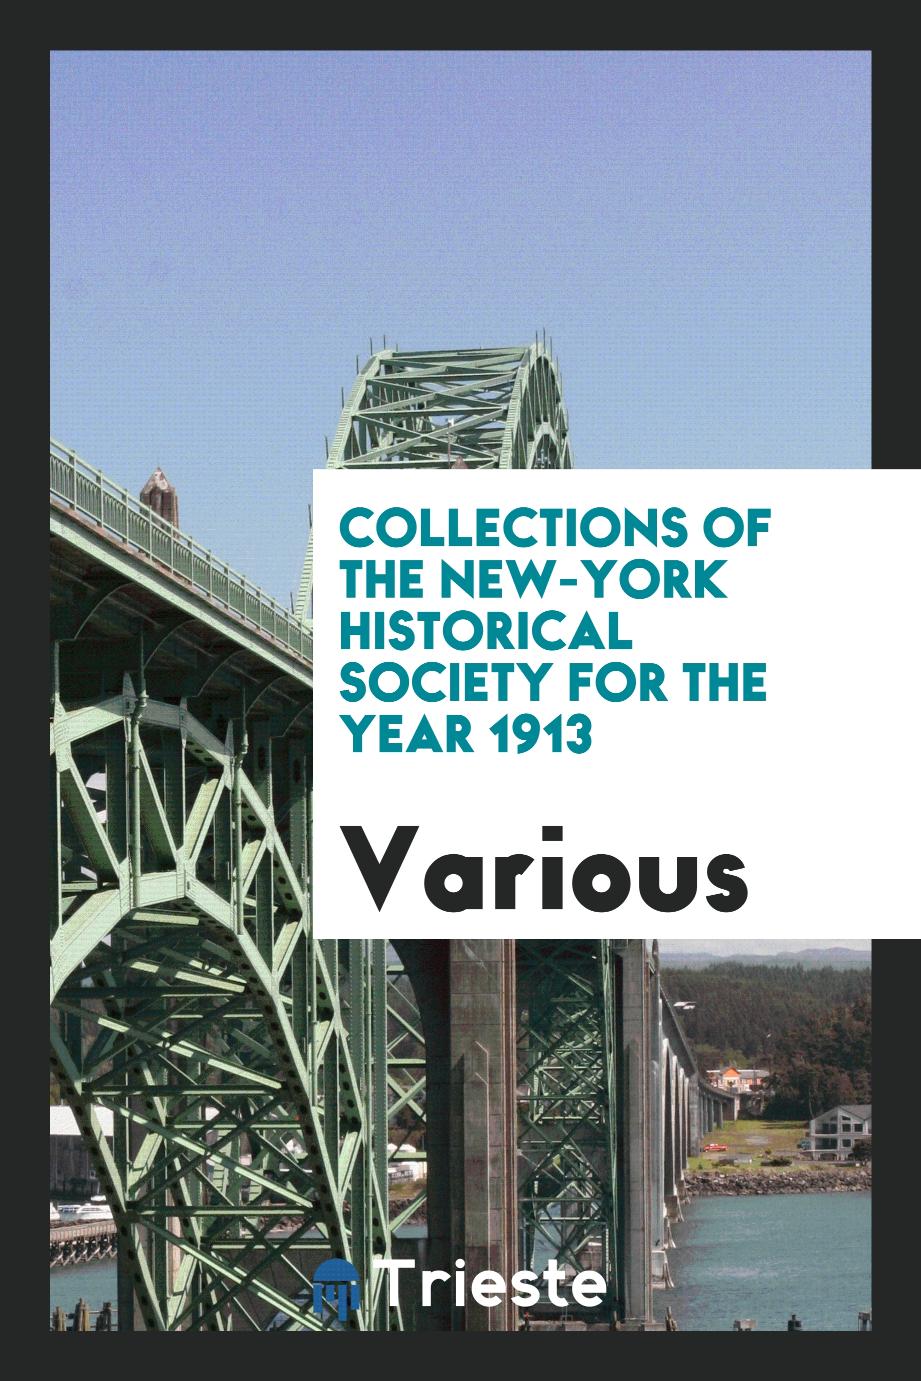 Collections of the New-York Historical Society for the year 1913